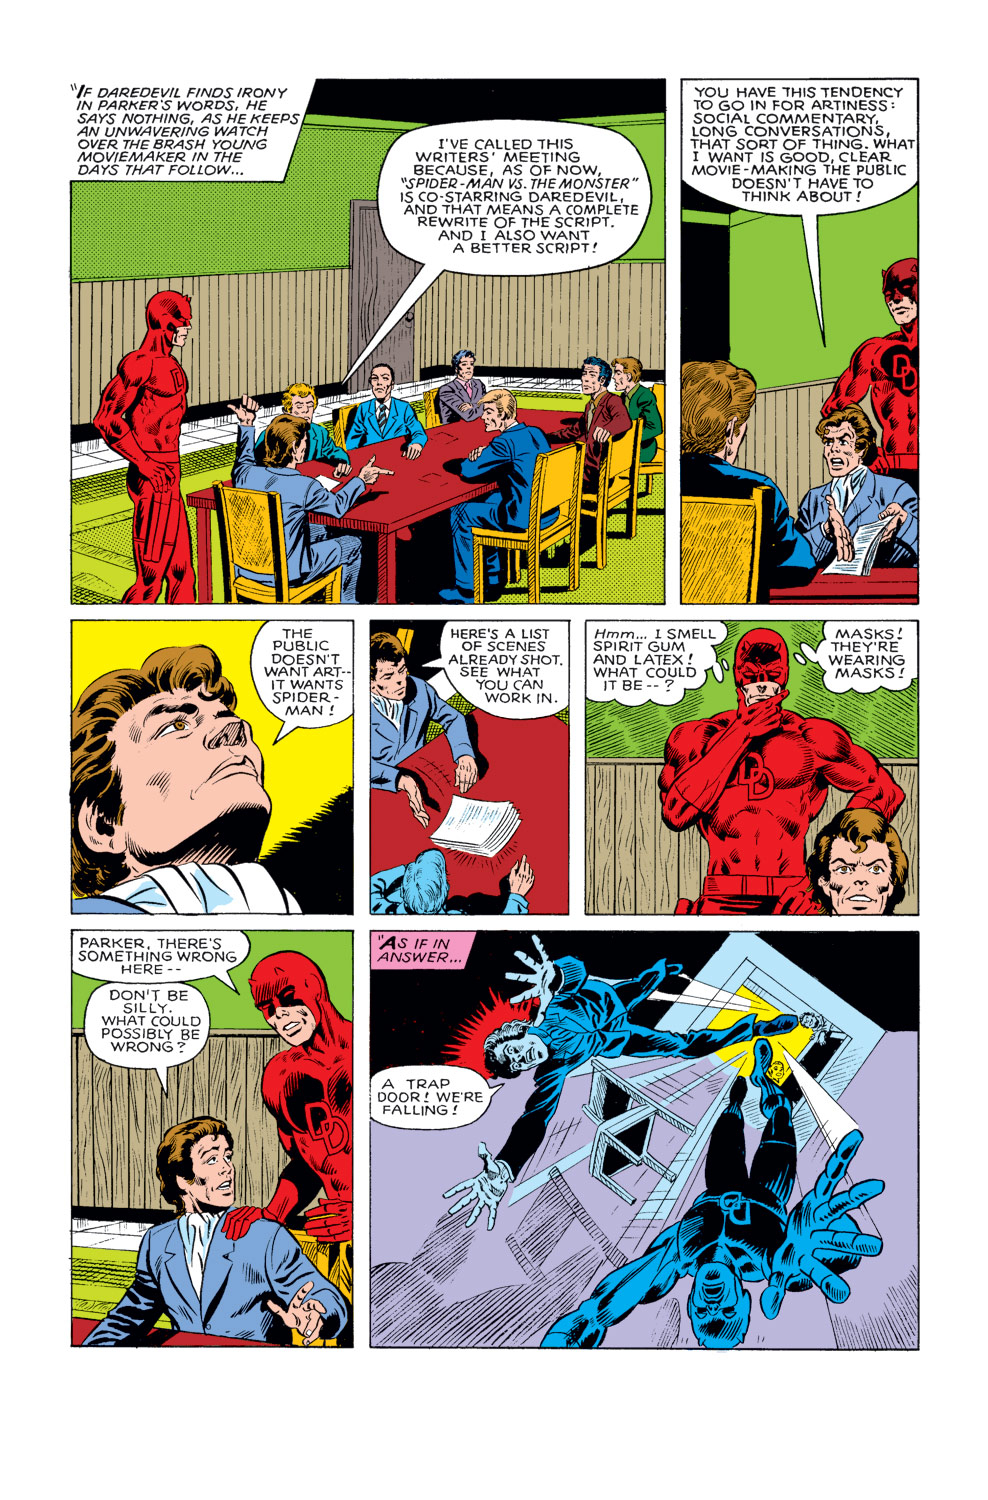 What If? (1977) issue 19 - Spider-Man had never become a crimefighter - Page 29